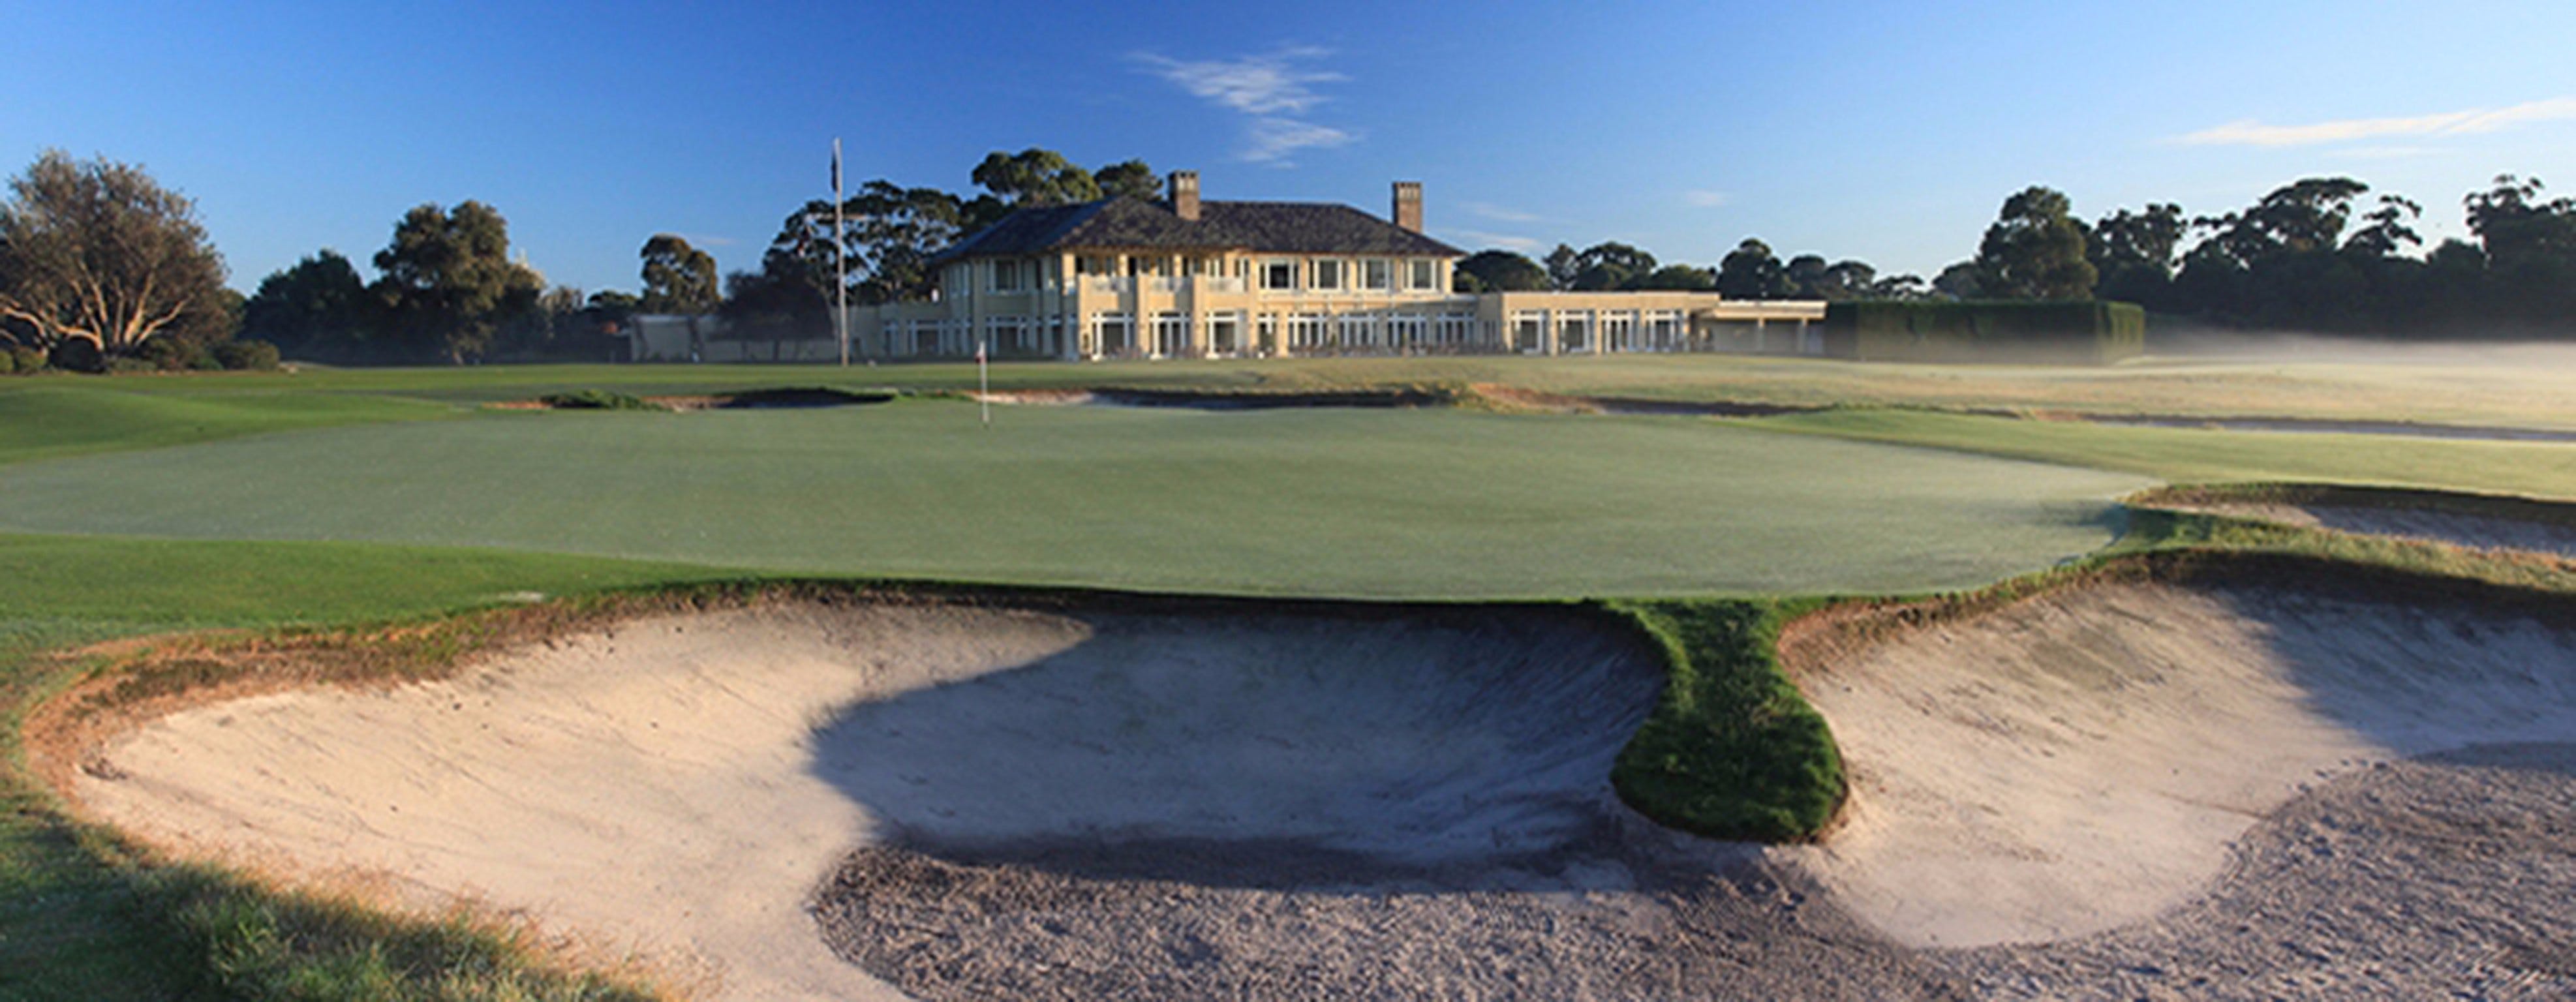 The Royal Melbourne Golf Club - Find Attractions